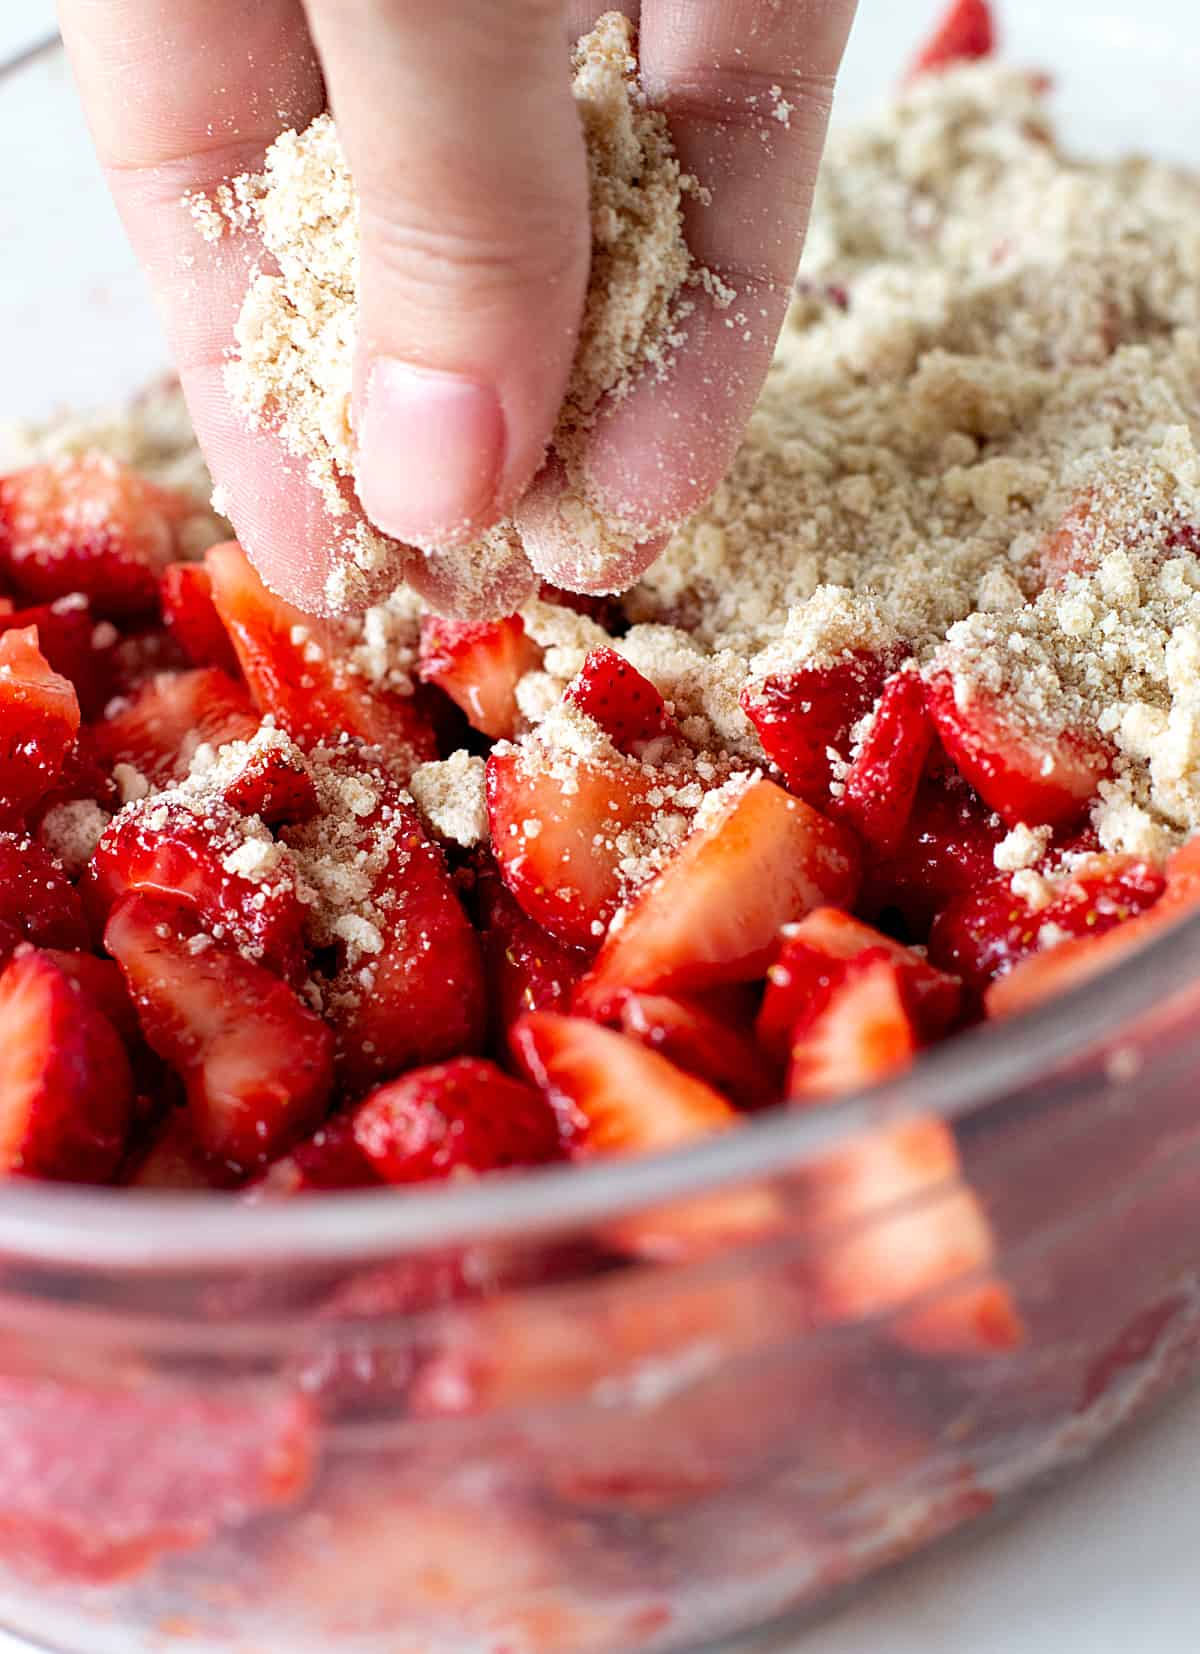 Hand adding crumble topping to glass dish with strawberries